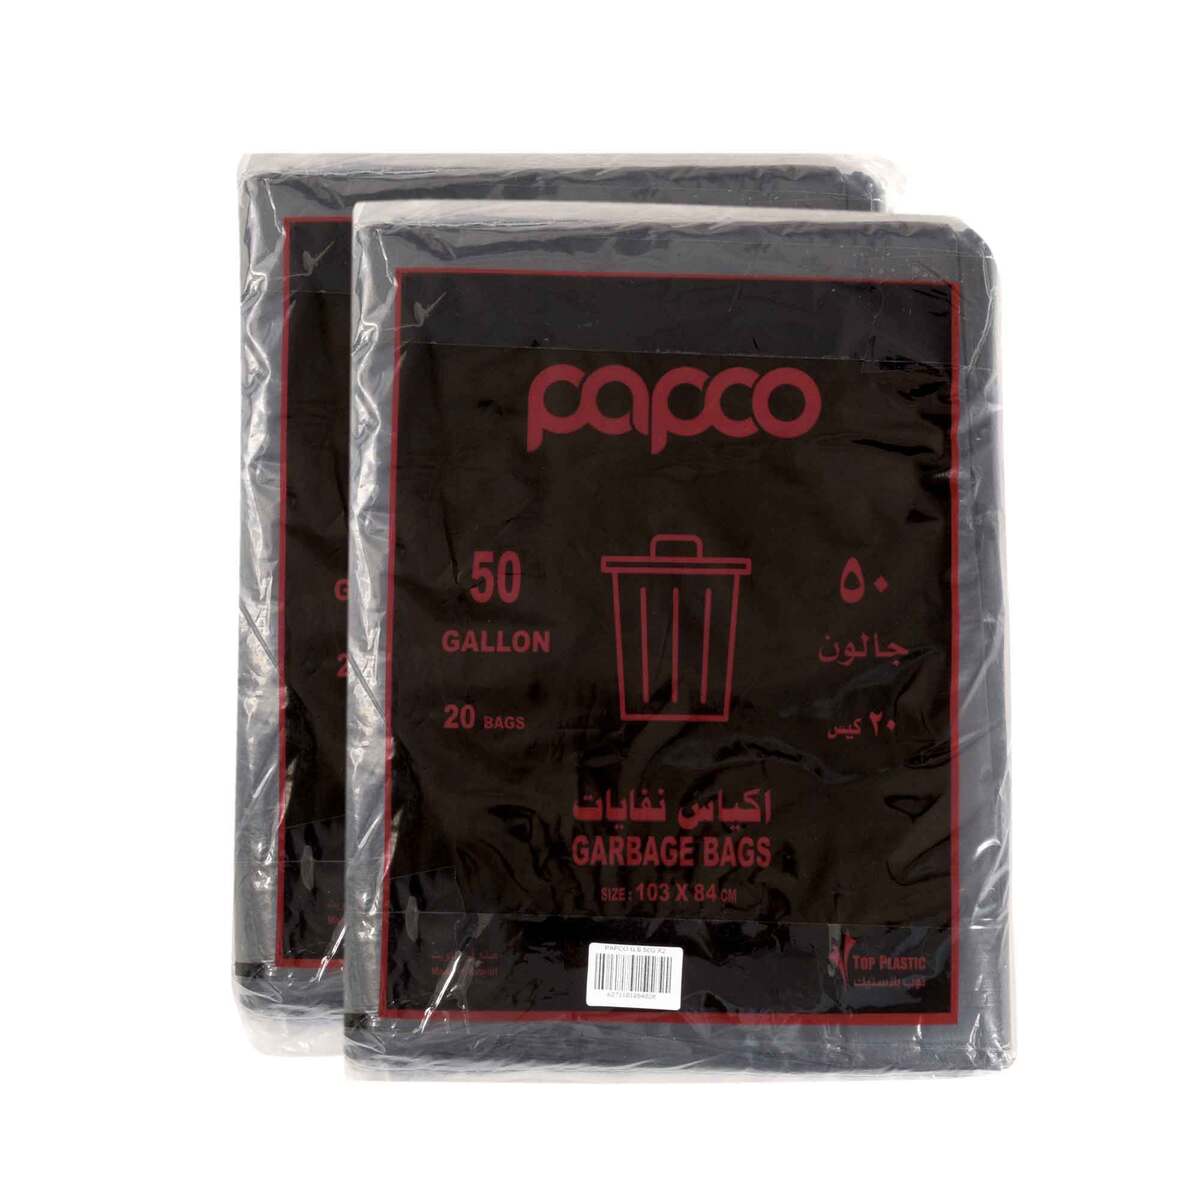 Papco Garbage Bags 103 x 84cm 50 Gallons Value Pack 2 x 20 pcs